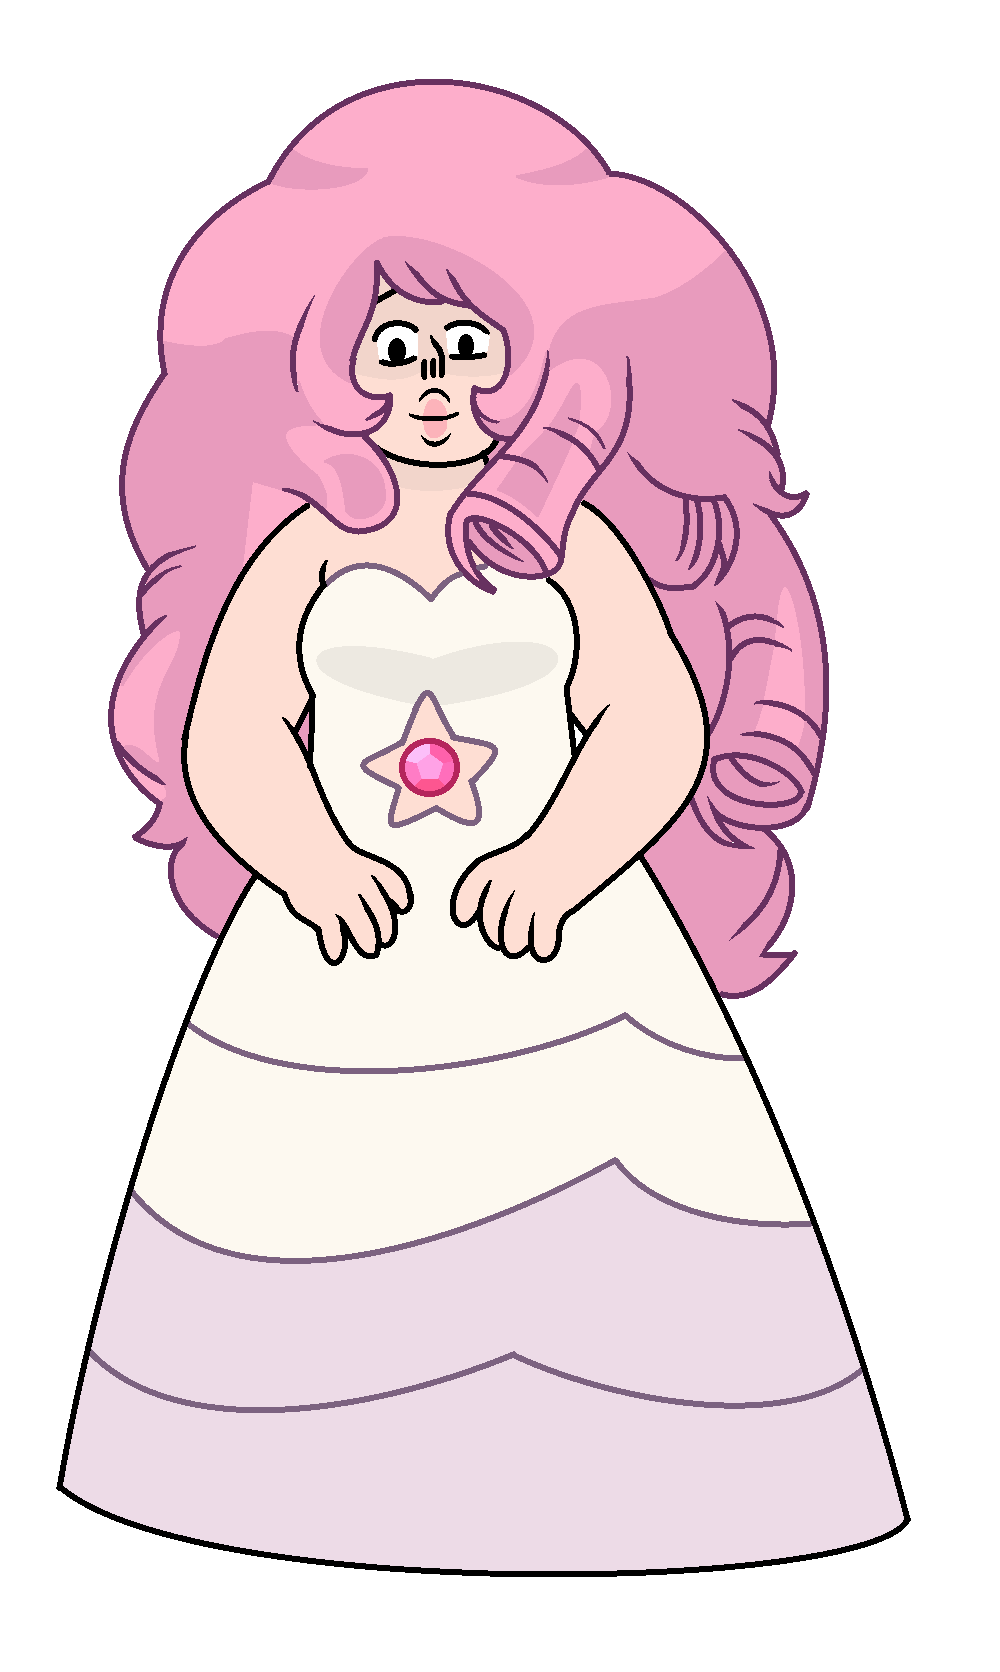 http://vignette3.wikia.nocookie.net/steven-universe/images/2/21/Rose_in_facade_view.png/revision/latest?cb=20150905063428